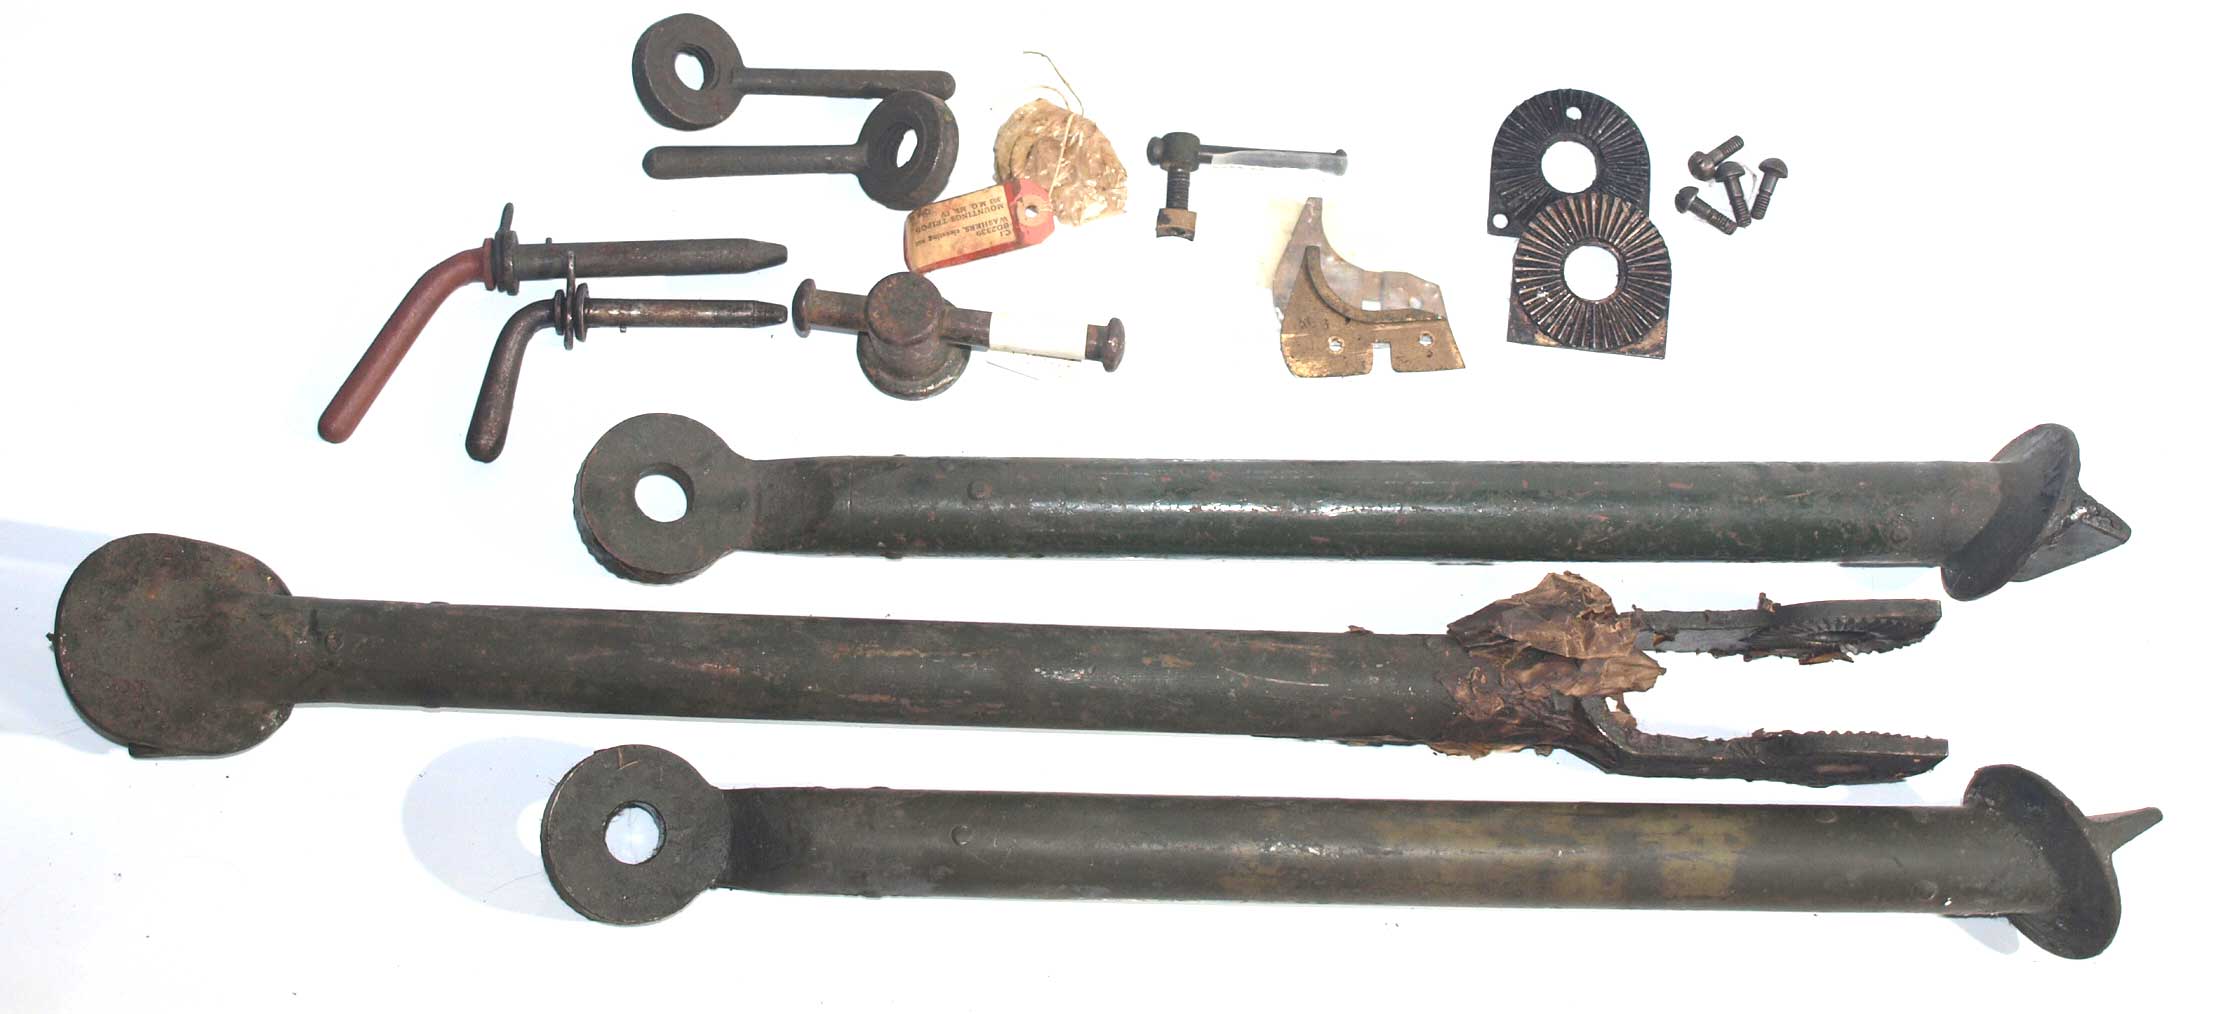 Vickers tripod legs and parts